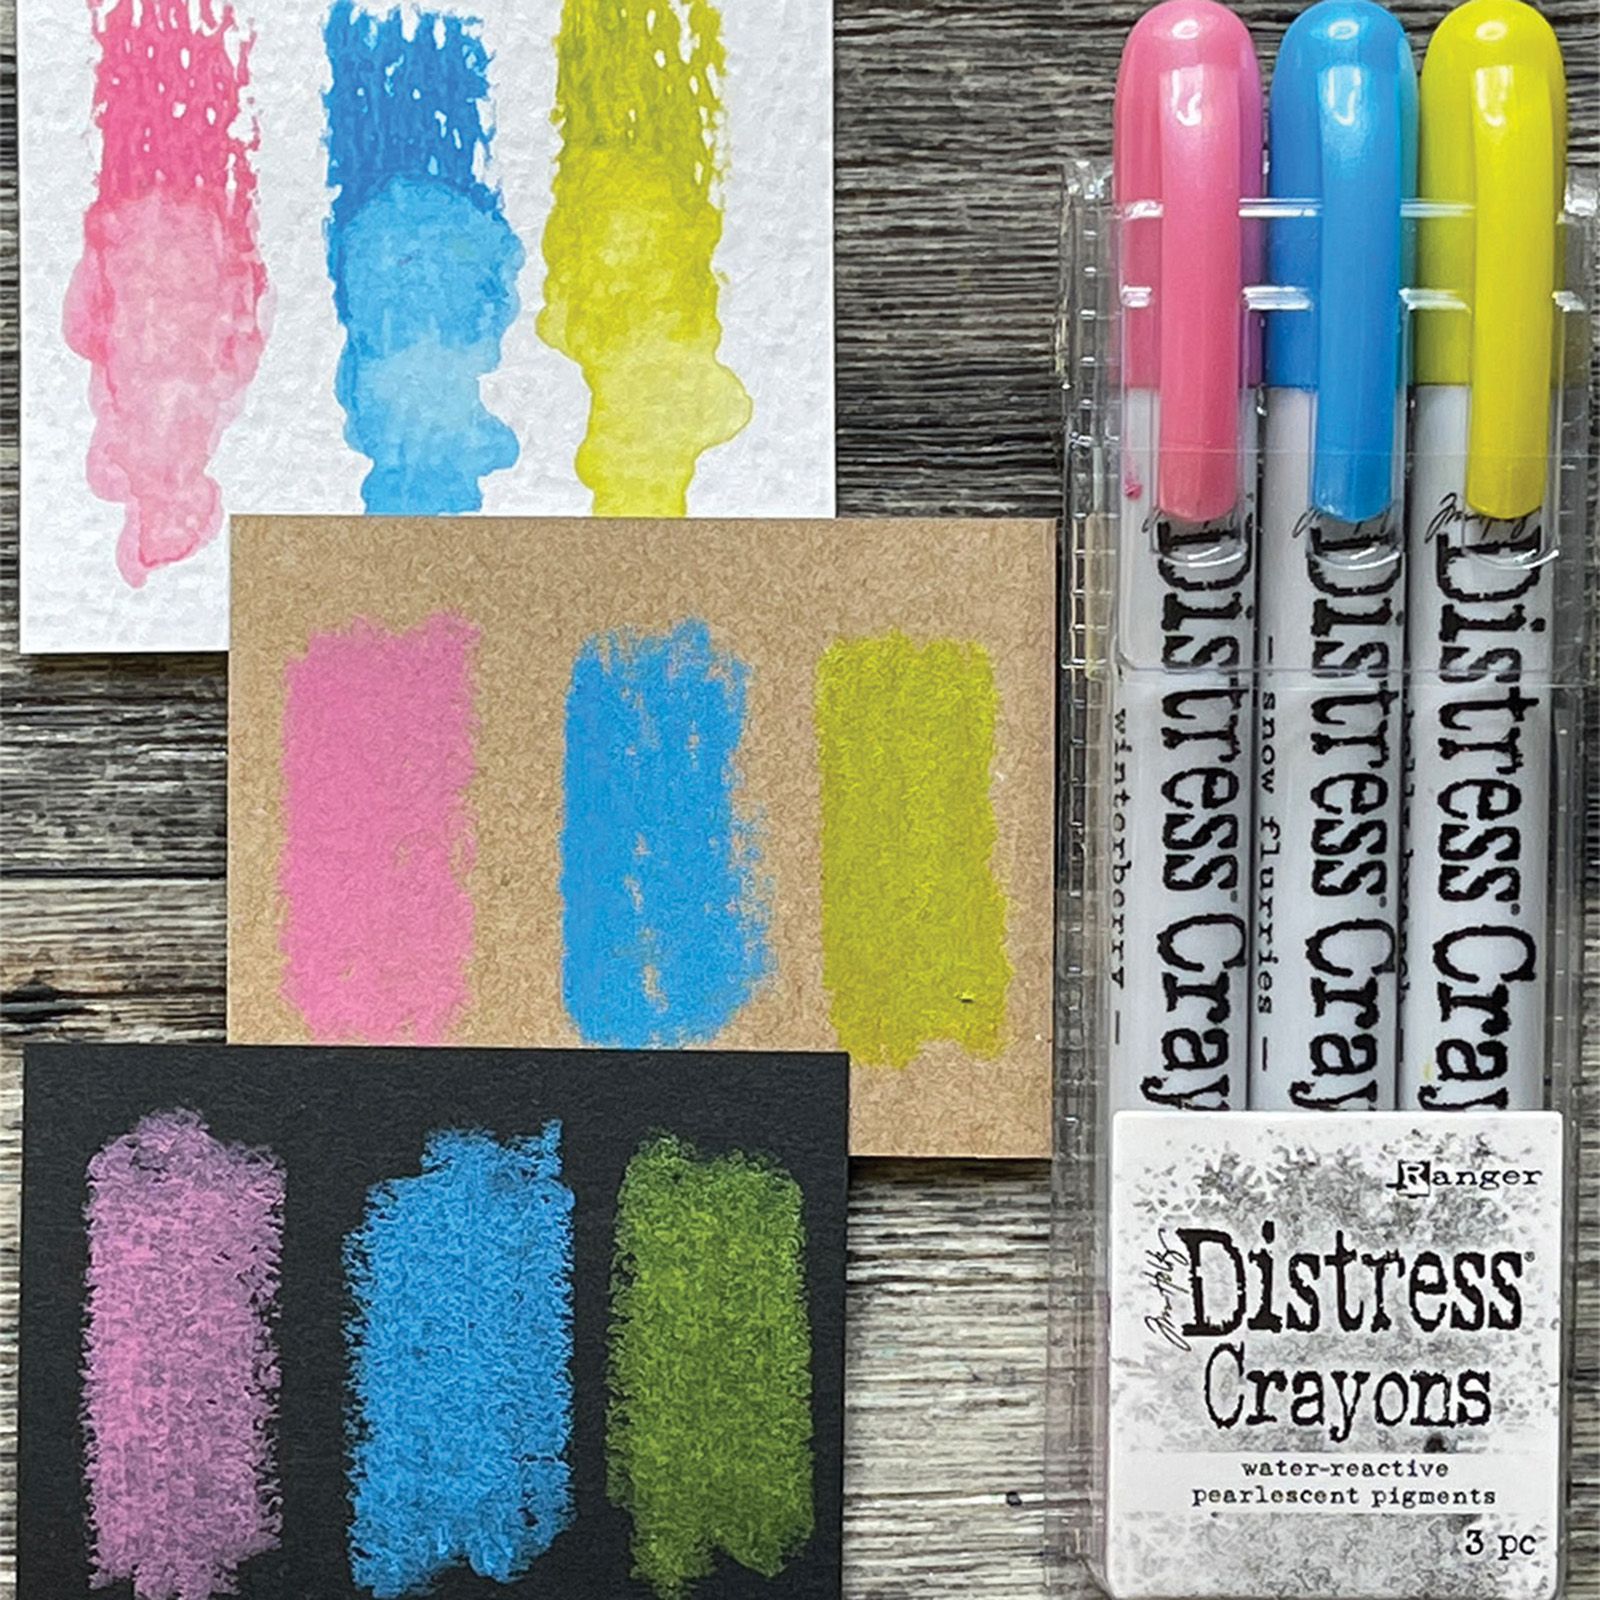 Ranger Distress Crayons in all colours!